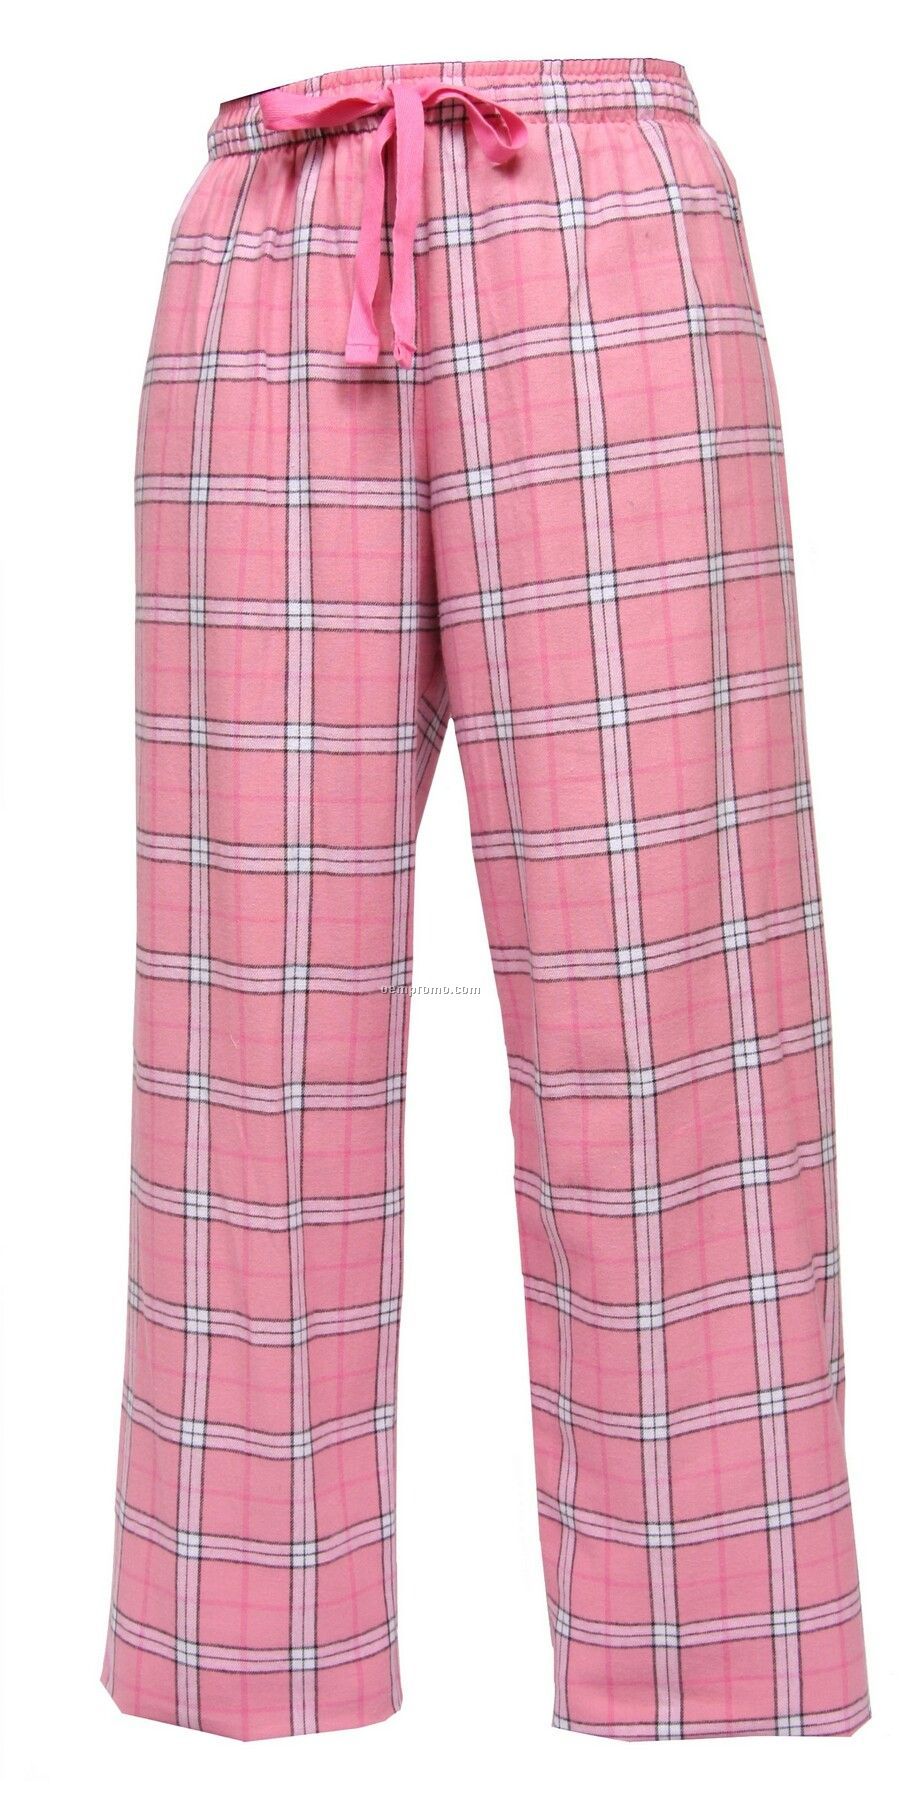 Adult Pink/Black Plaid Fashion Flannel Pant With Tie Cord